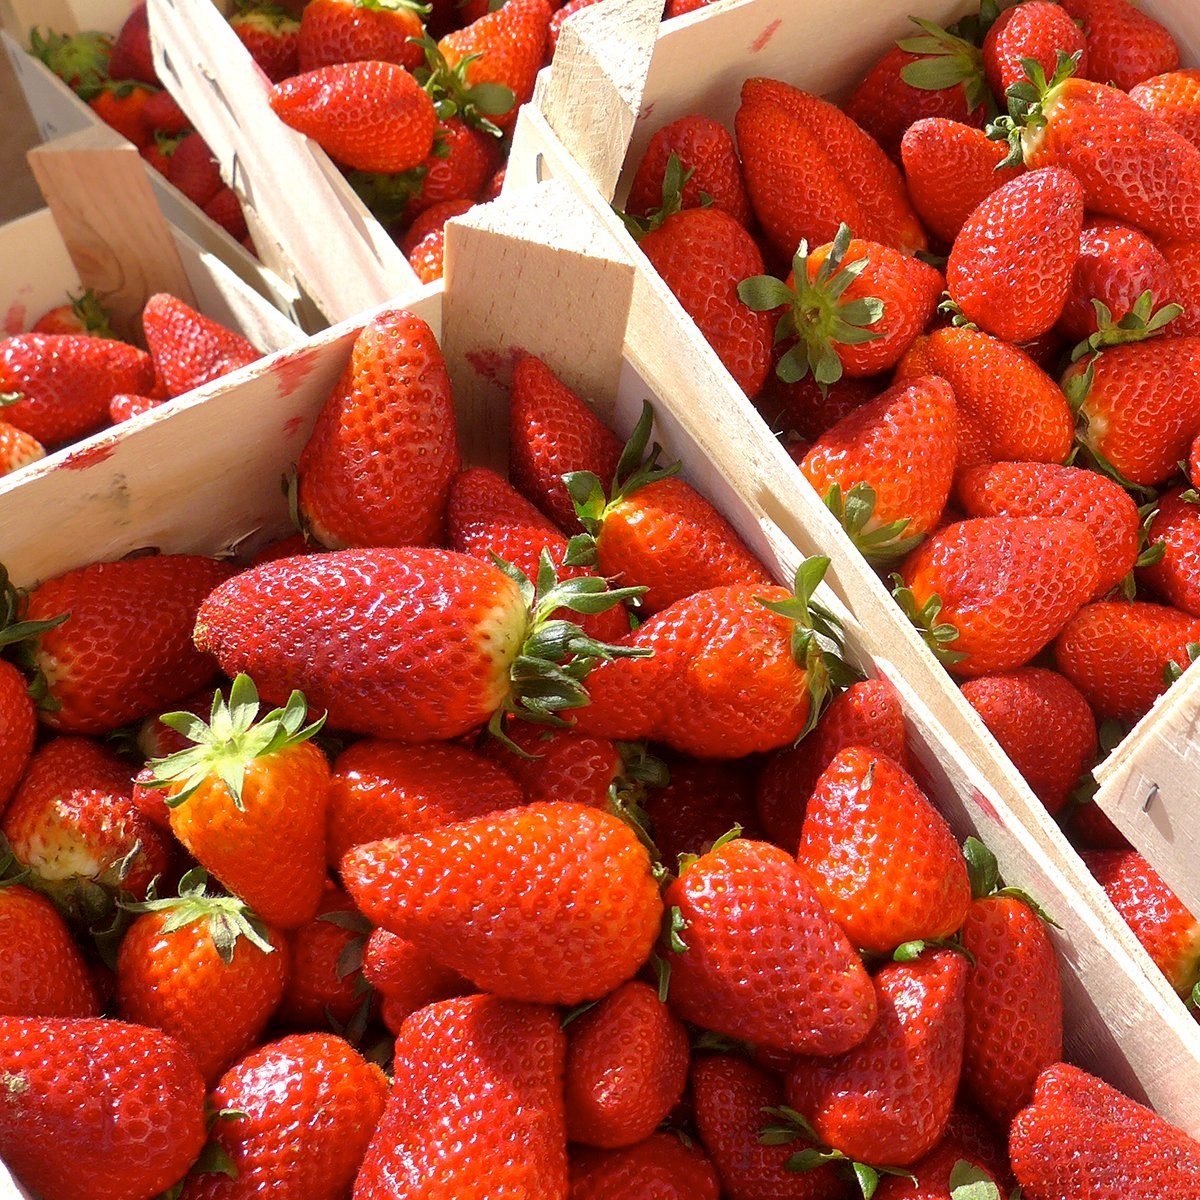 Fresh strawberries in wooden boxes, ready for sale.